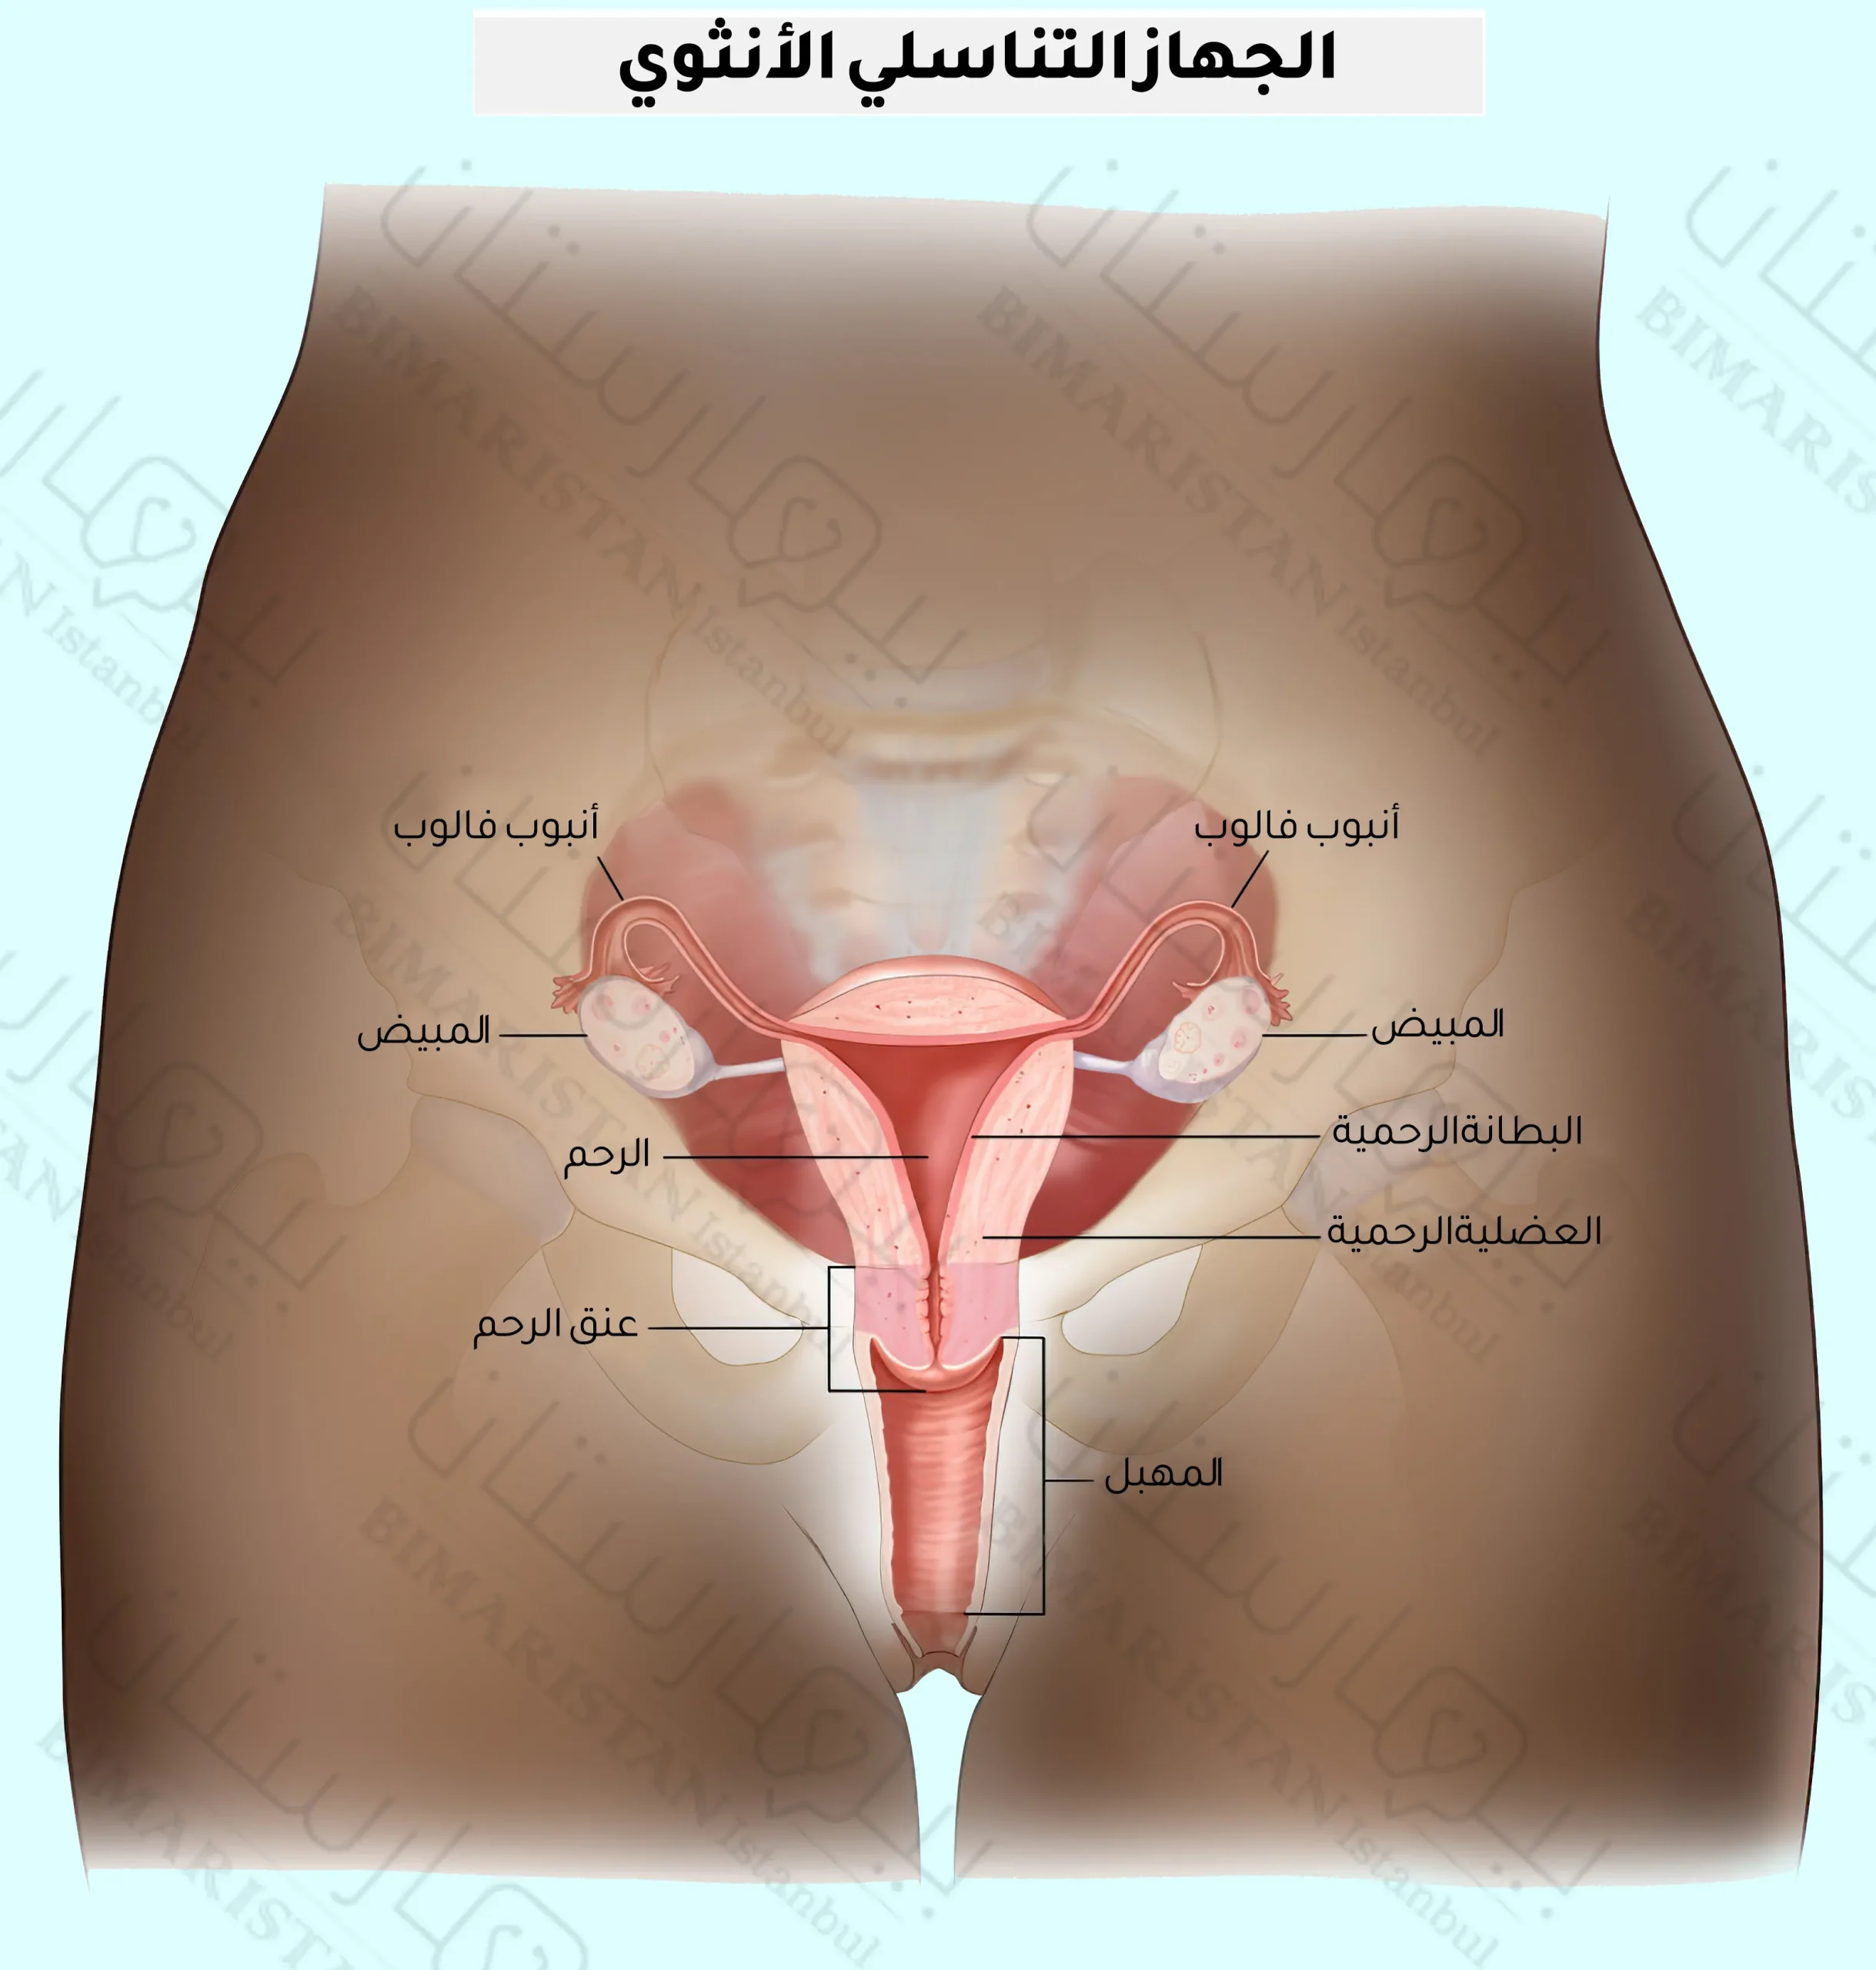 An overview of the female reproductive system